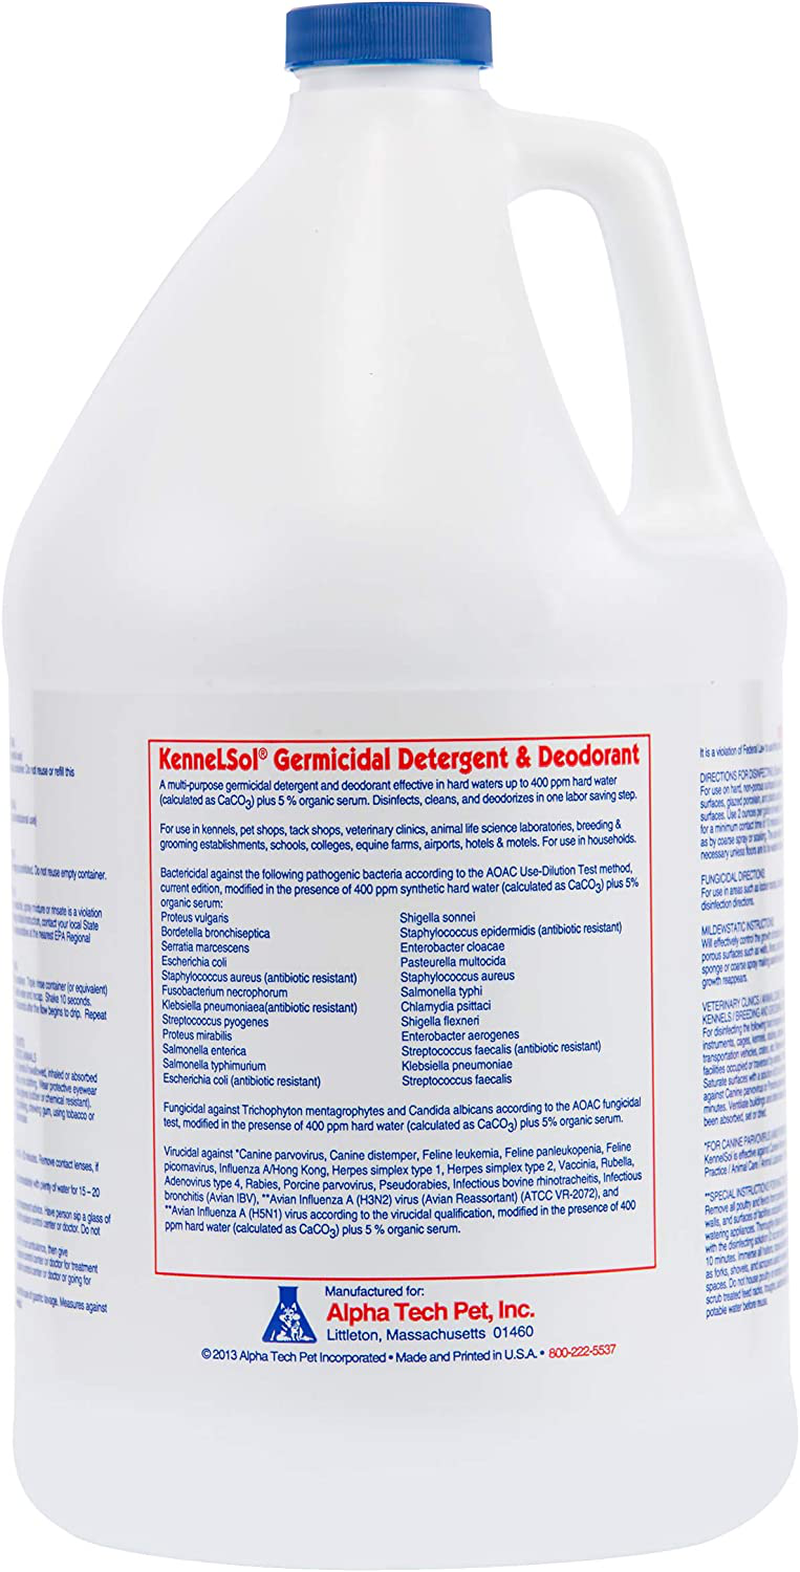 Kennelsol Dog Crate Cleaner and Disinfectant | Cleaning Concentrate, Kills Bacteria & Viruses, Parvo Disinfectant | Kennel Cleaner | 1 Gallon